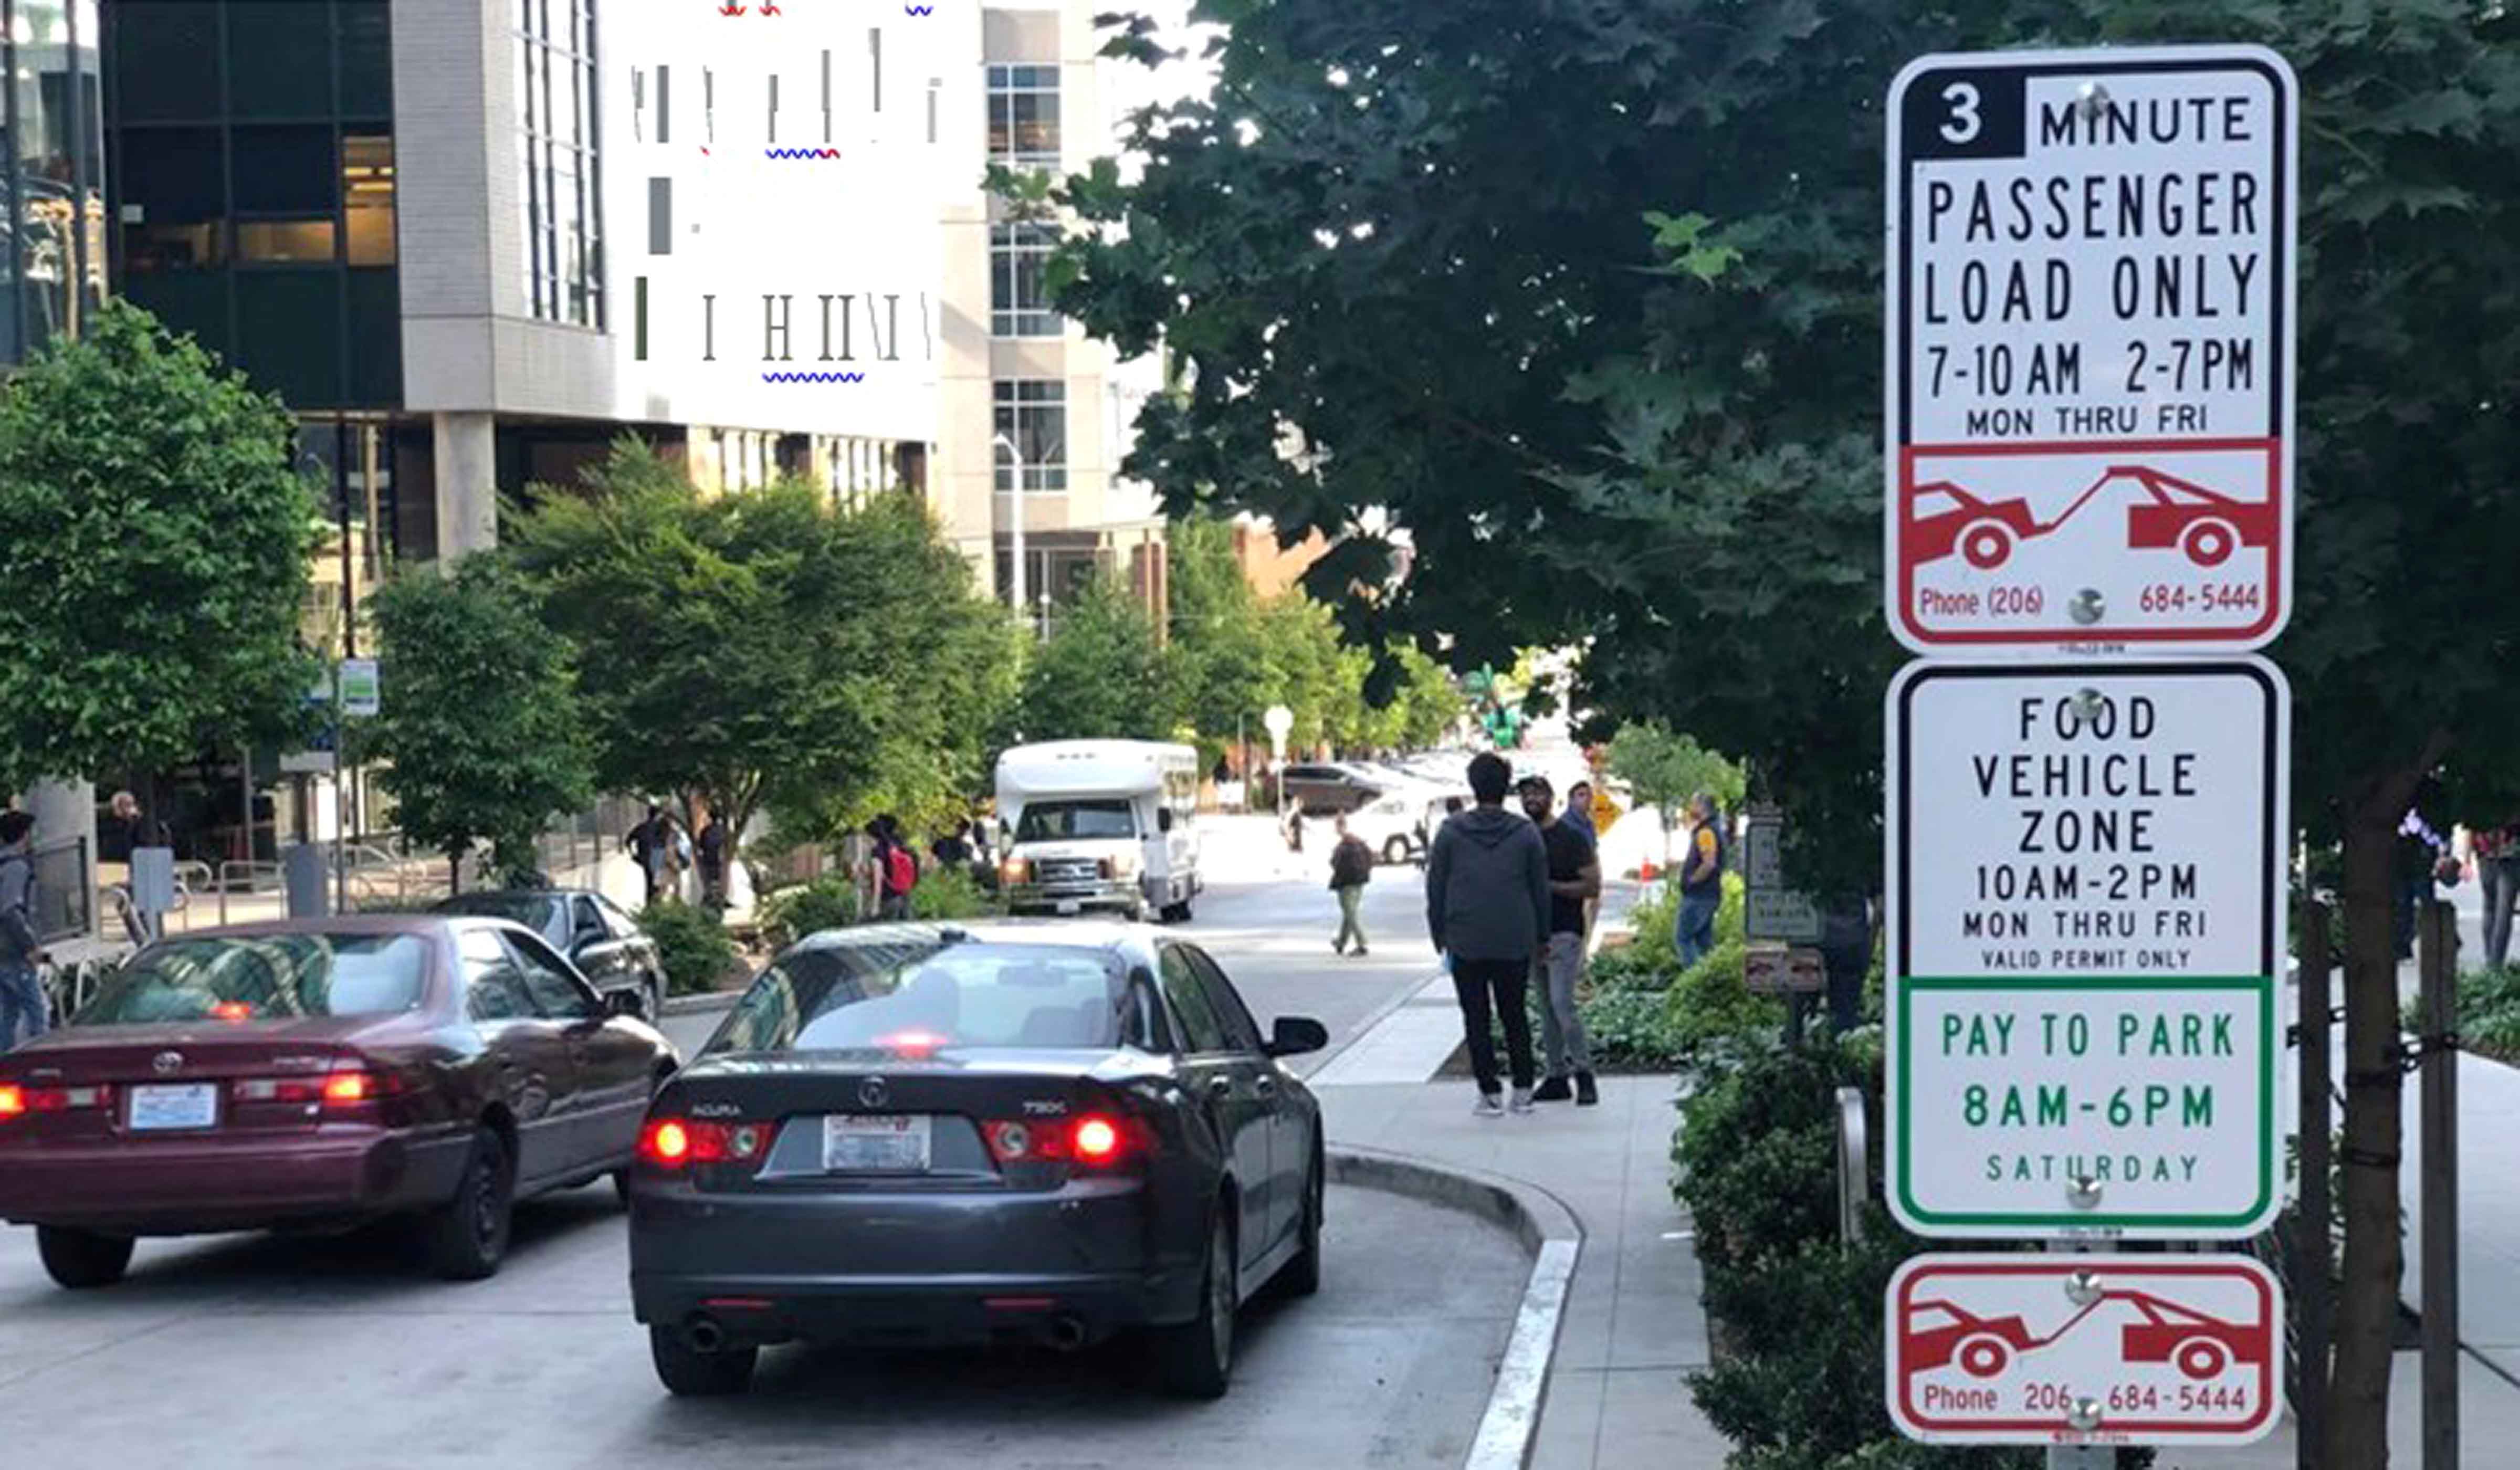 This photograph shows a loading zone in Seattle with a sign reading, "3-minute passenger load only 7 to 10 am and 2 to 7 pm Monday through Friday" and "Food vehicle zone 10 am to 2 pm Monday through Friday, valid permit only"